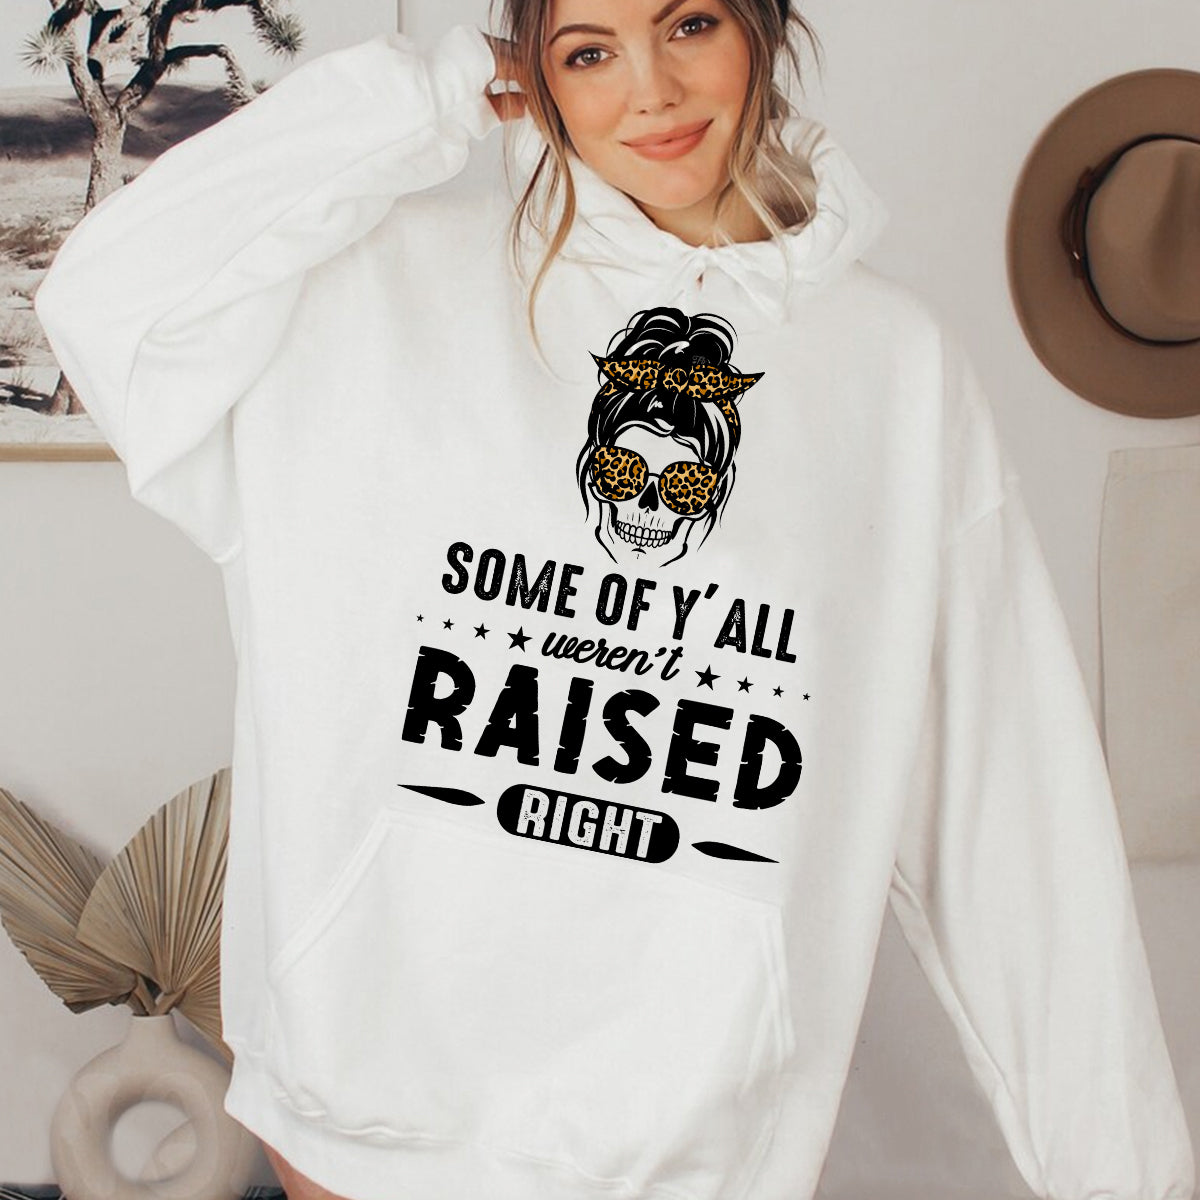 Teesdily | Skull Mom Leopard Shirt, Some Of Y'All Weren'T Raised Right Top, Funny Mothers Day Gift From Kids, Cool Mom Gifts Unisex Tshirt Hoodie Sweatshirt Size S-5Xl / Mug 11-15Oz